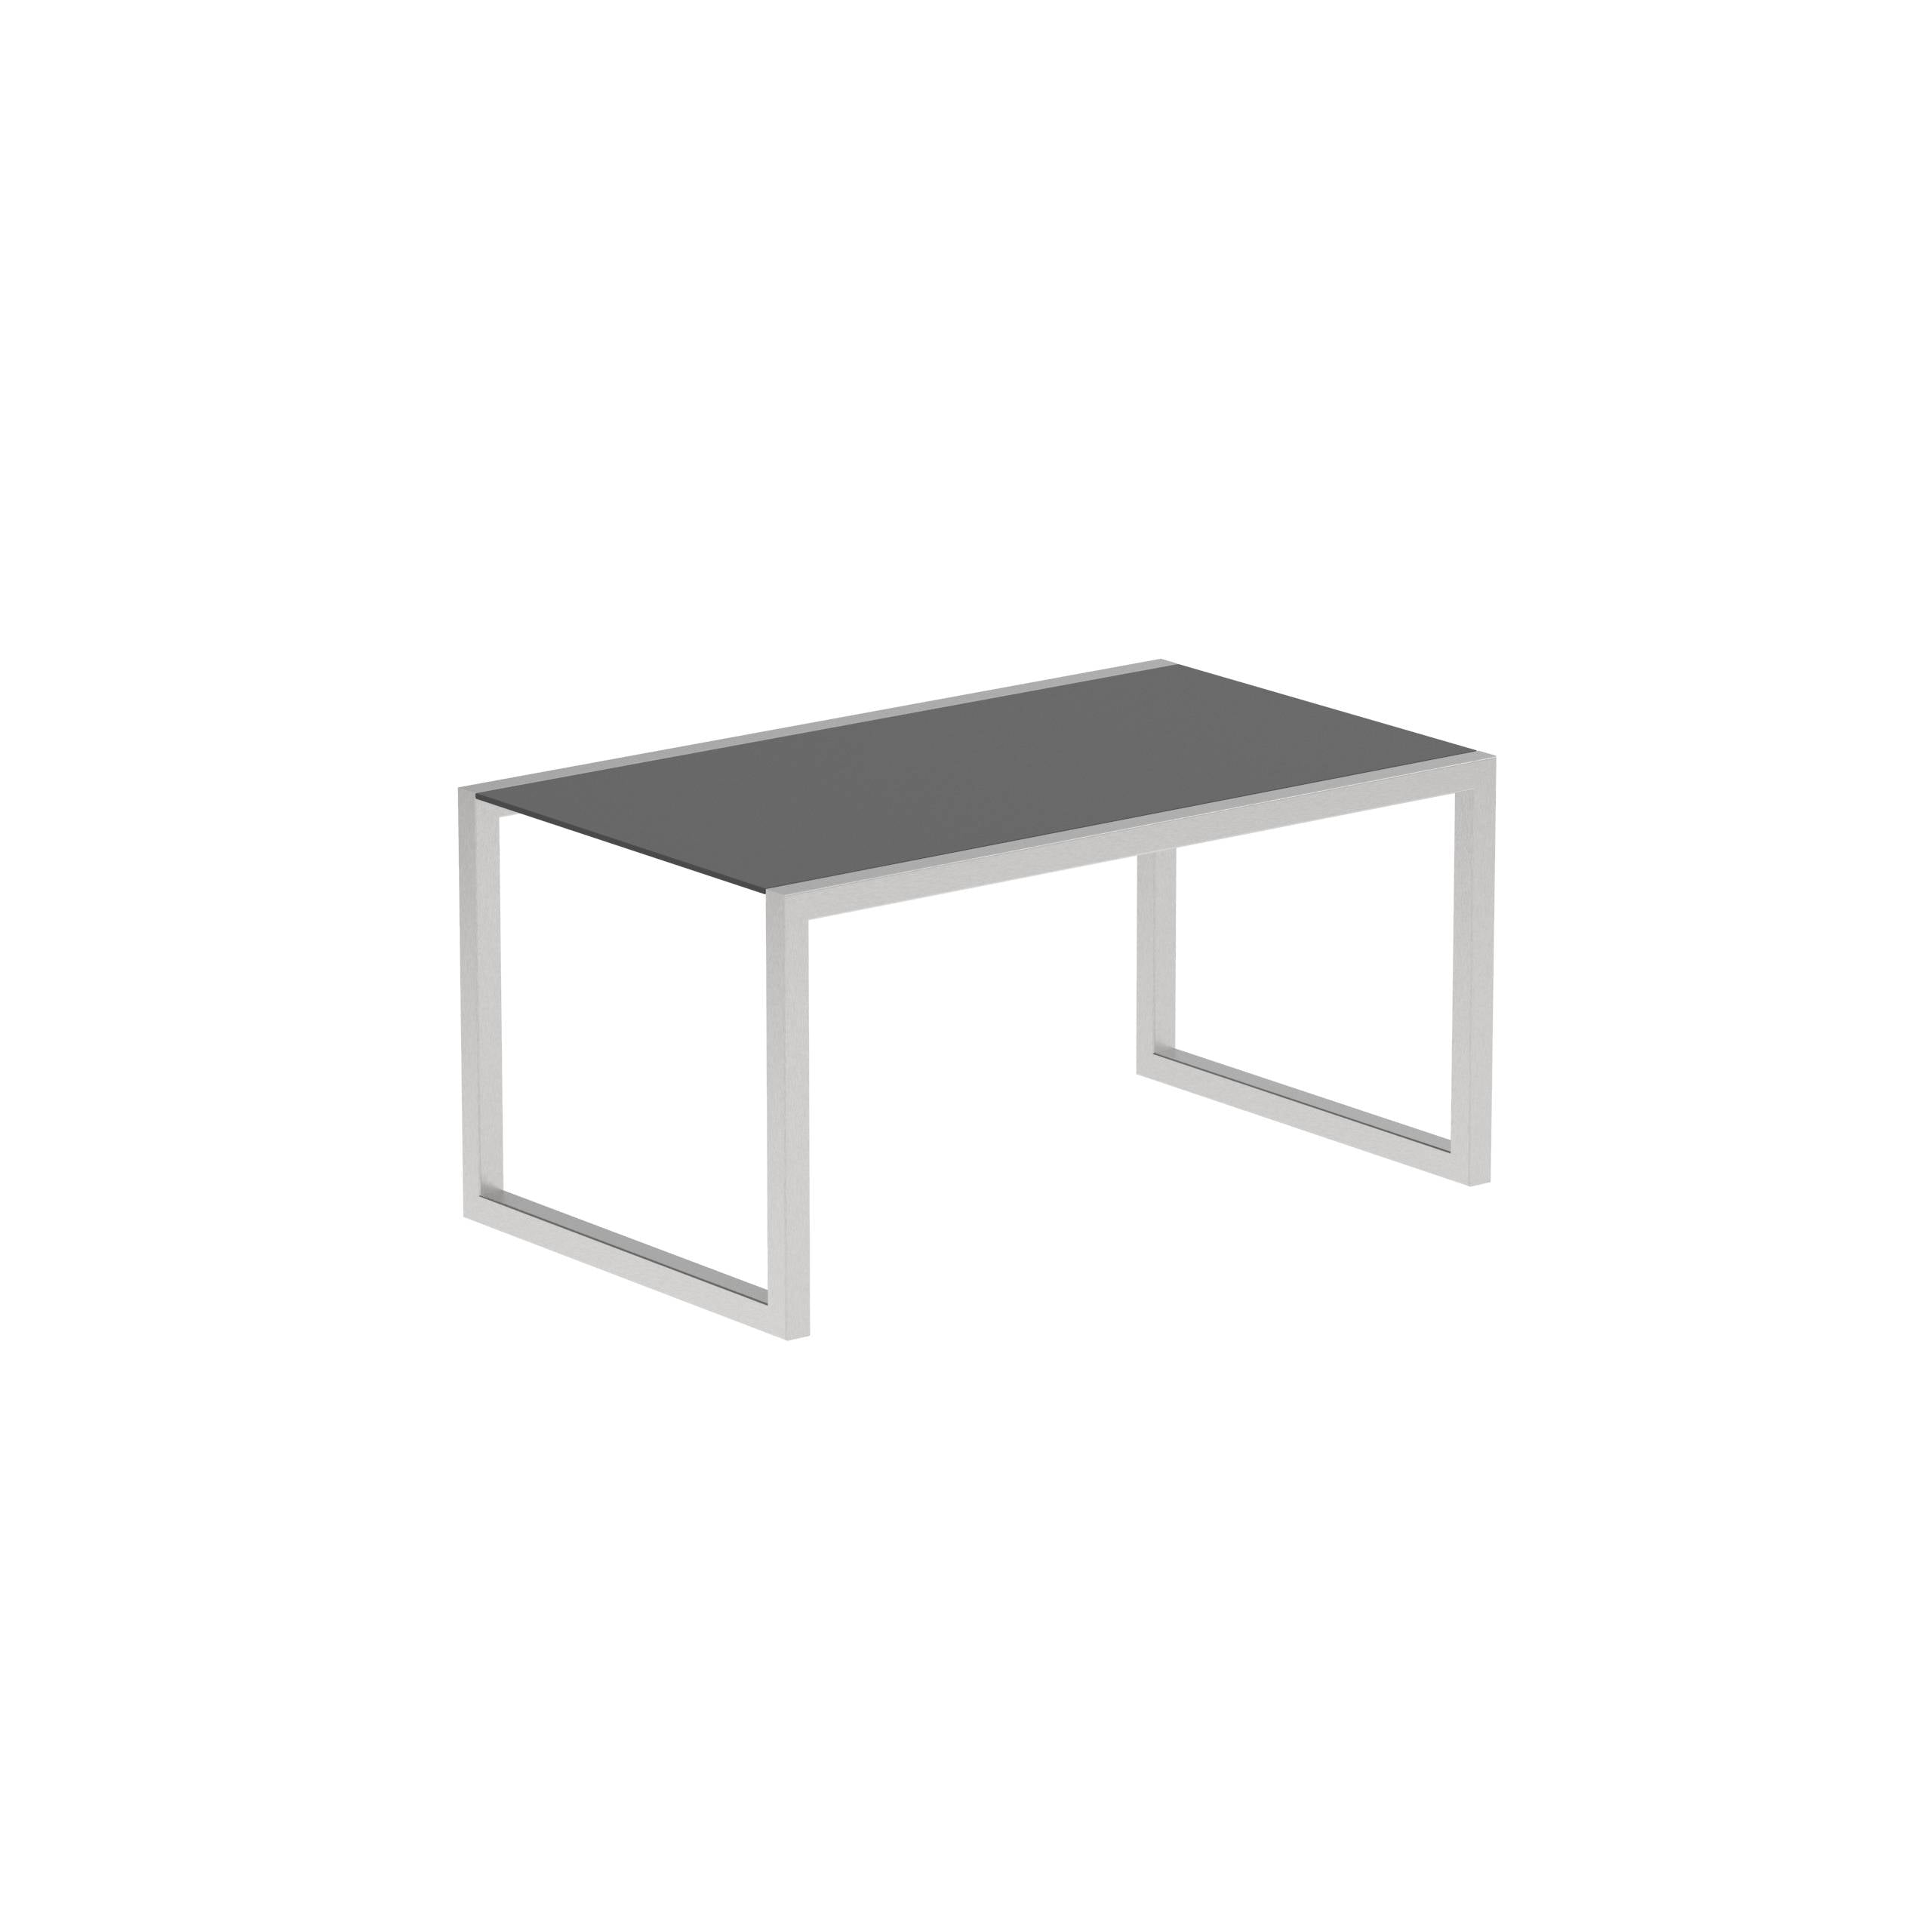 Ninix Table 150x90 Cm With Stainless Steel And Ceramic Top Black